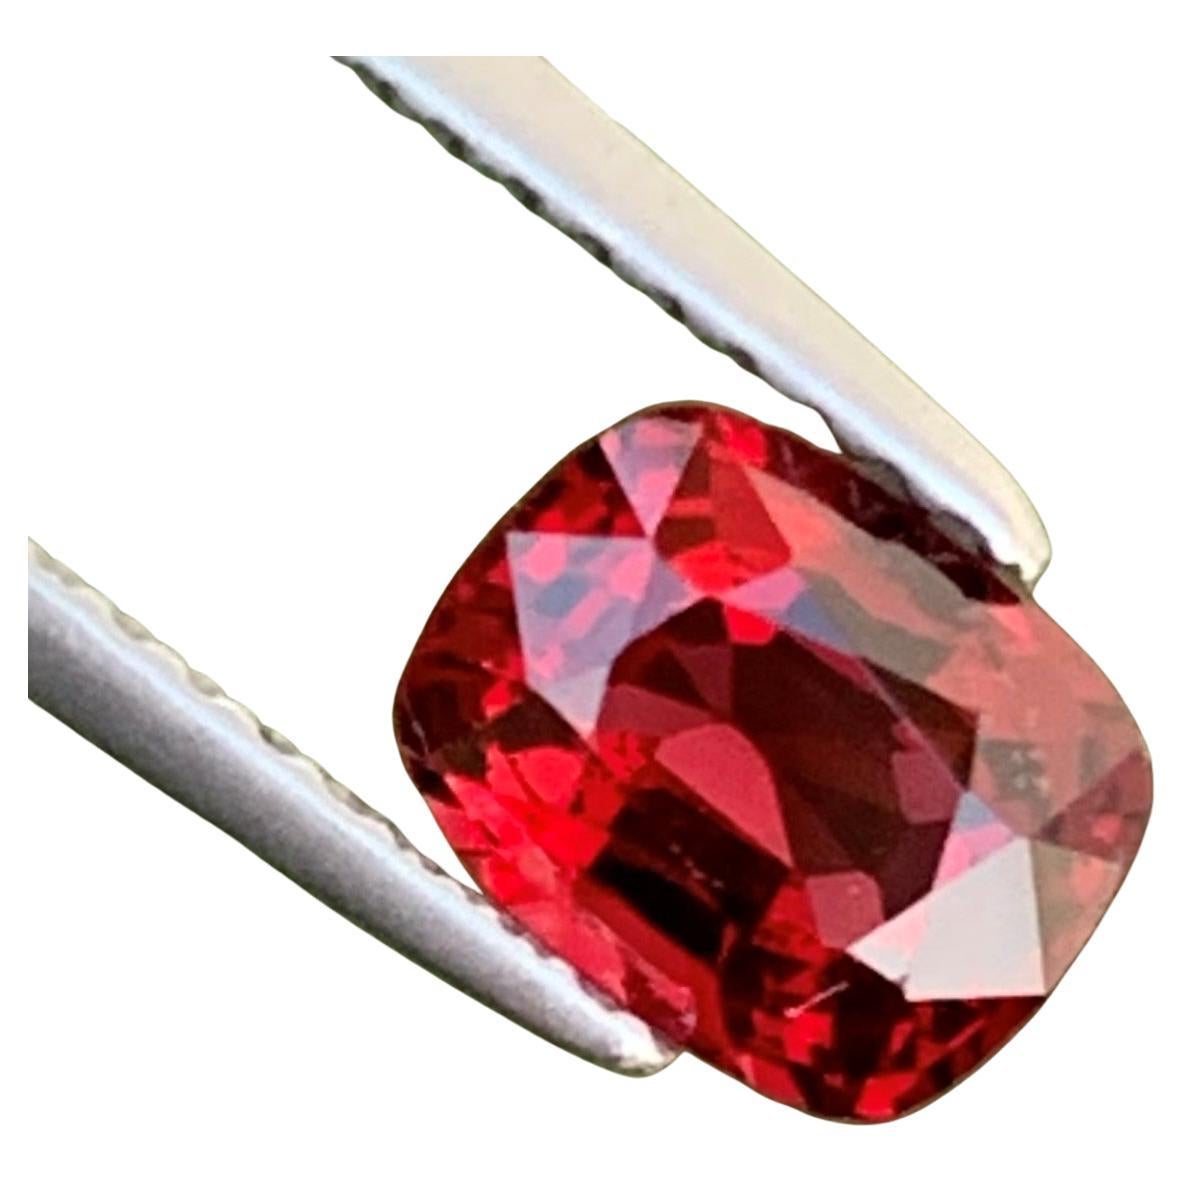 1.05 Carat Loose Red Spinel from Myanmar Burma Available for Jewelry Making